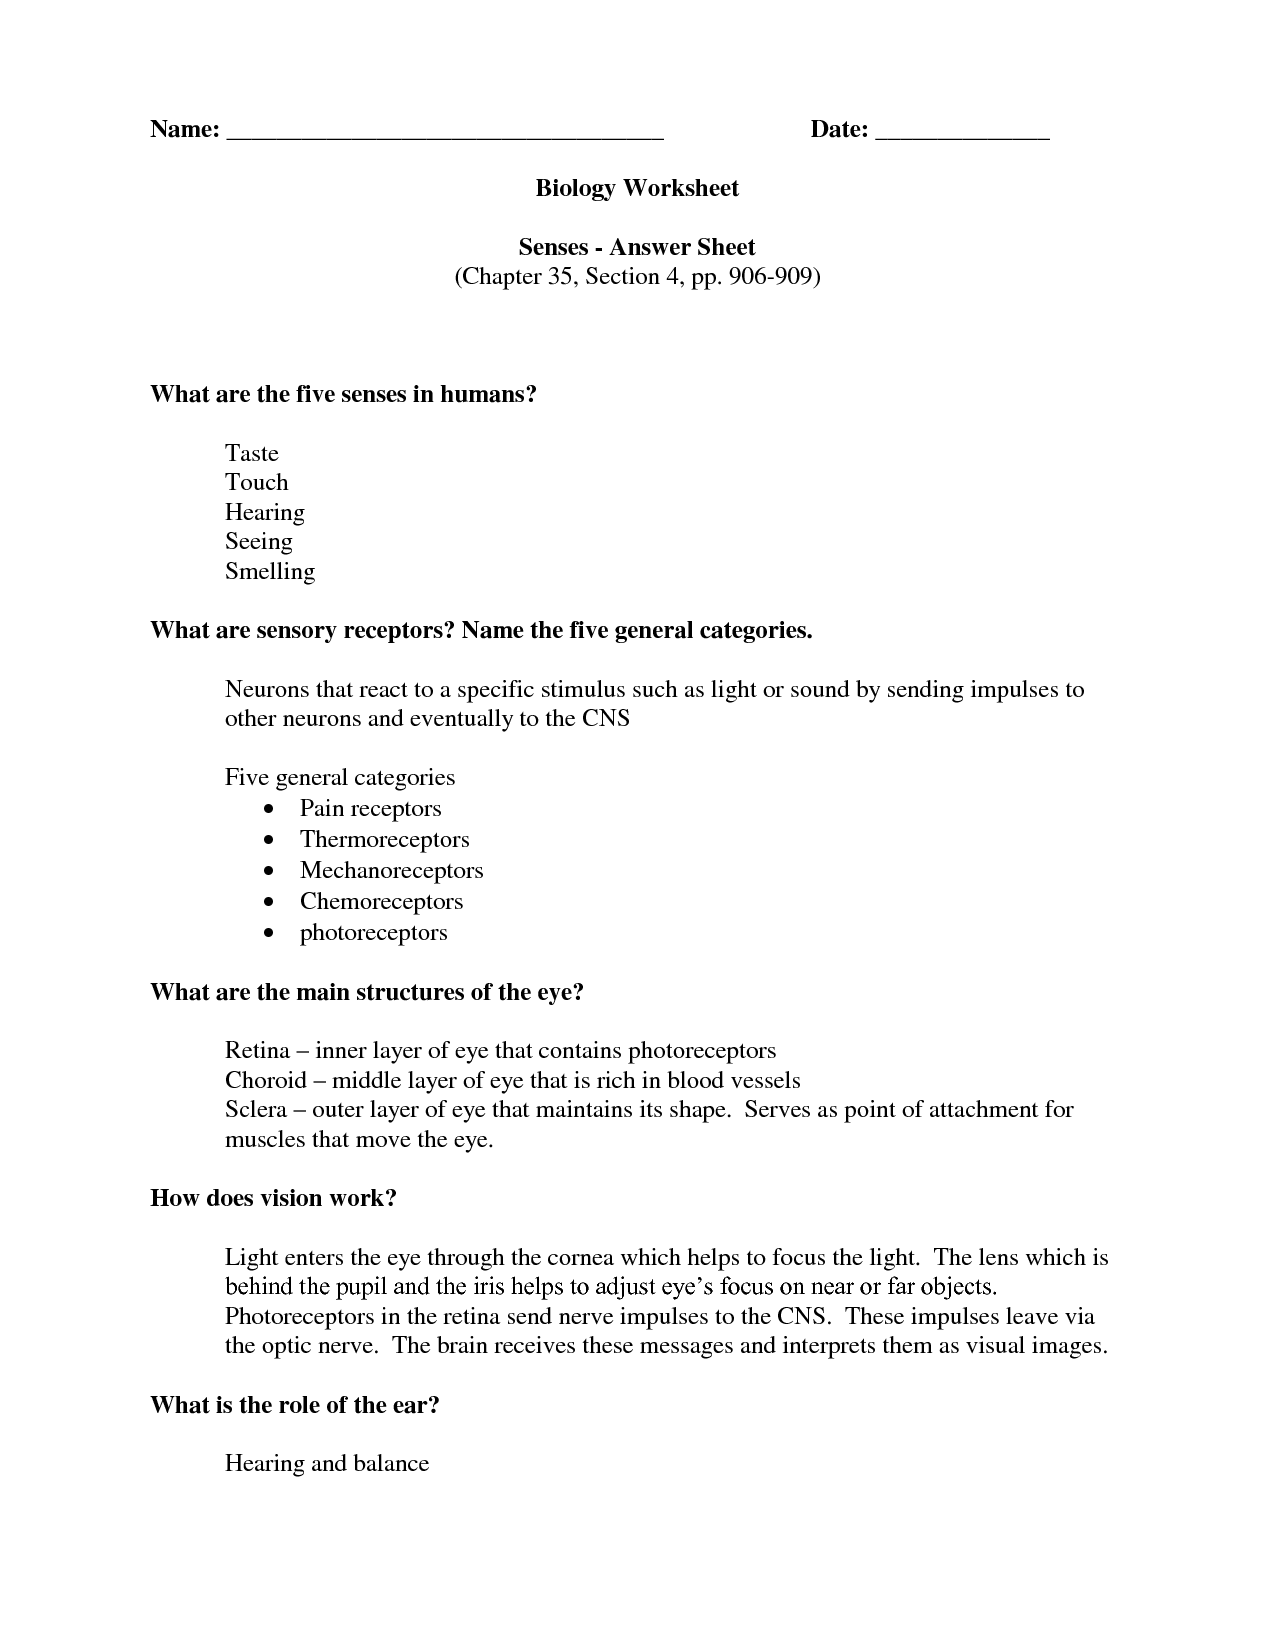 14 Best Images of 7th Grade Biology Worksheets - 7th Grade Life Science